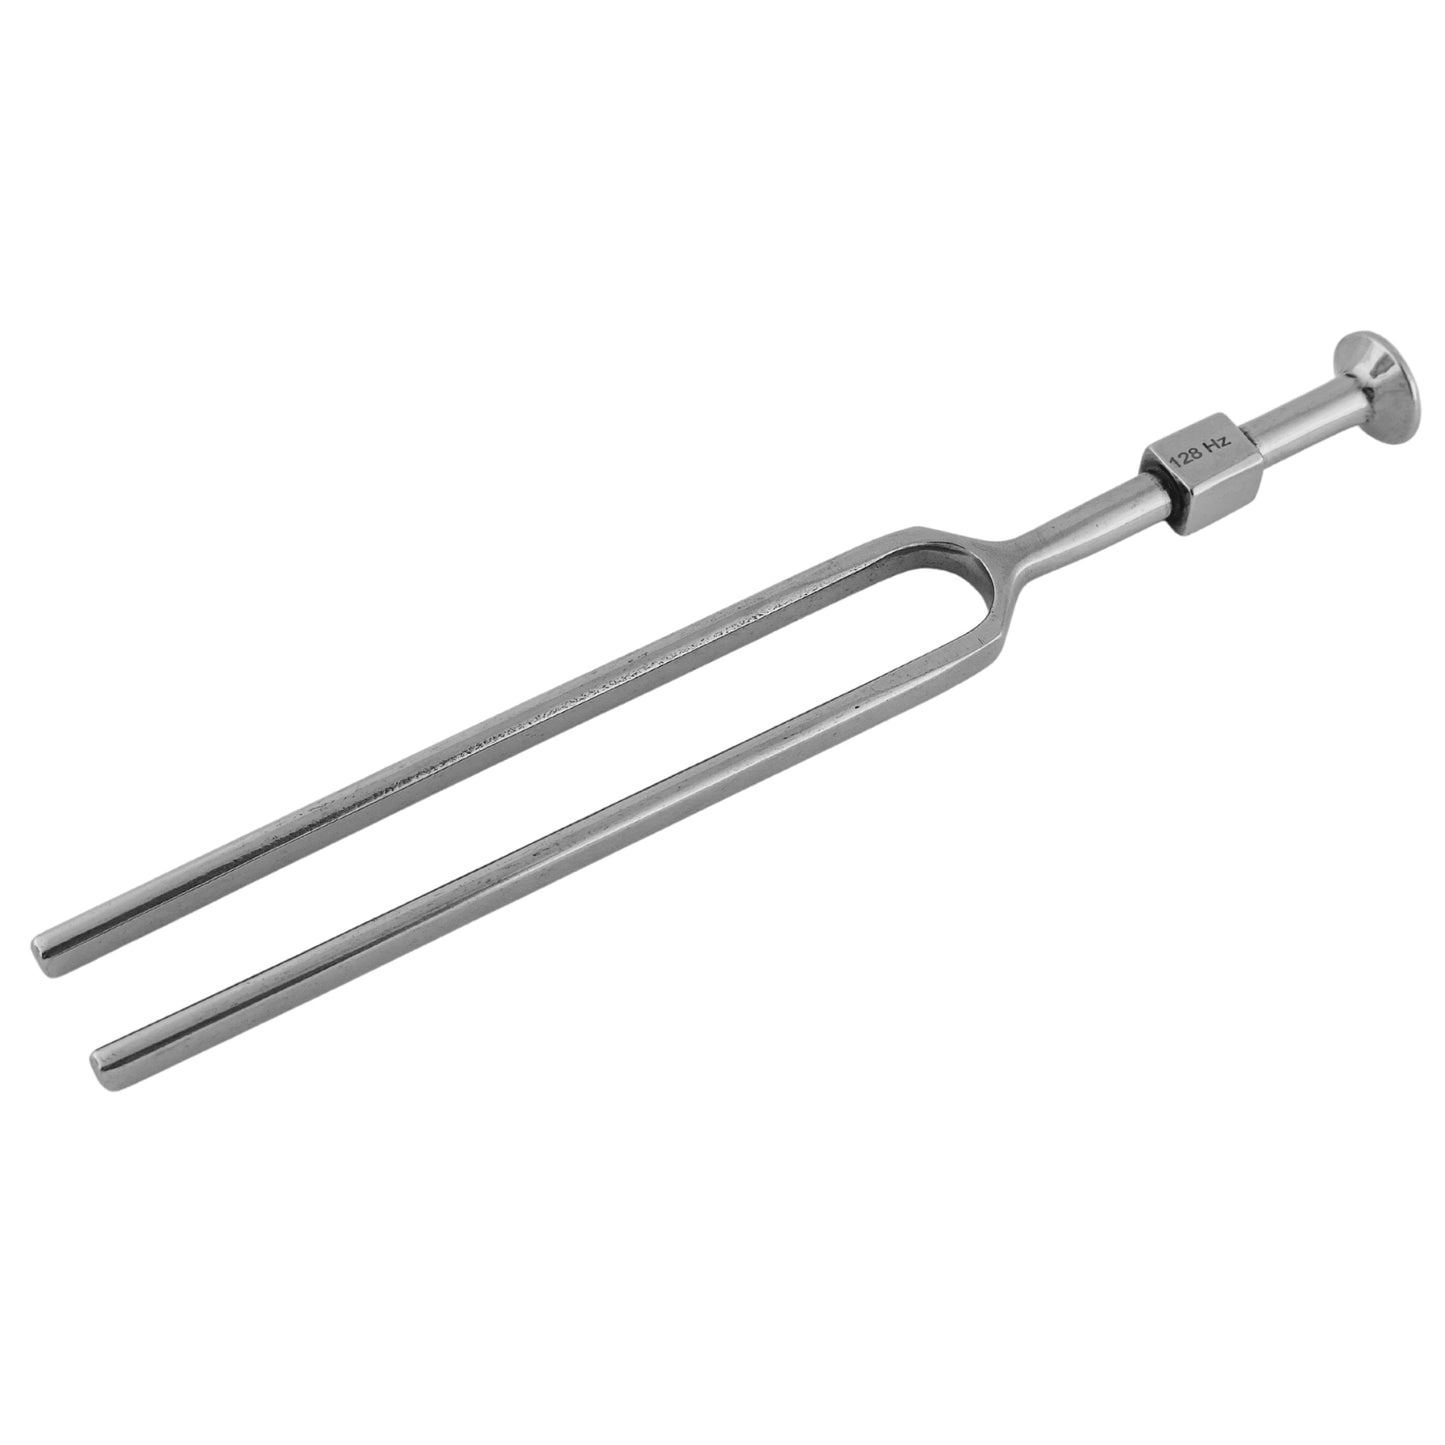 Basic Tuning Fork C128 With Foot